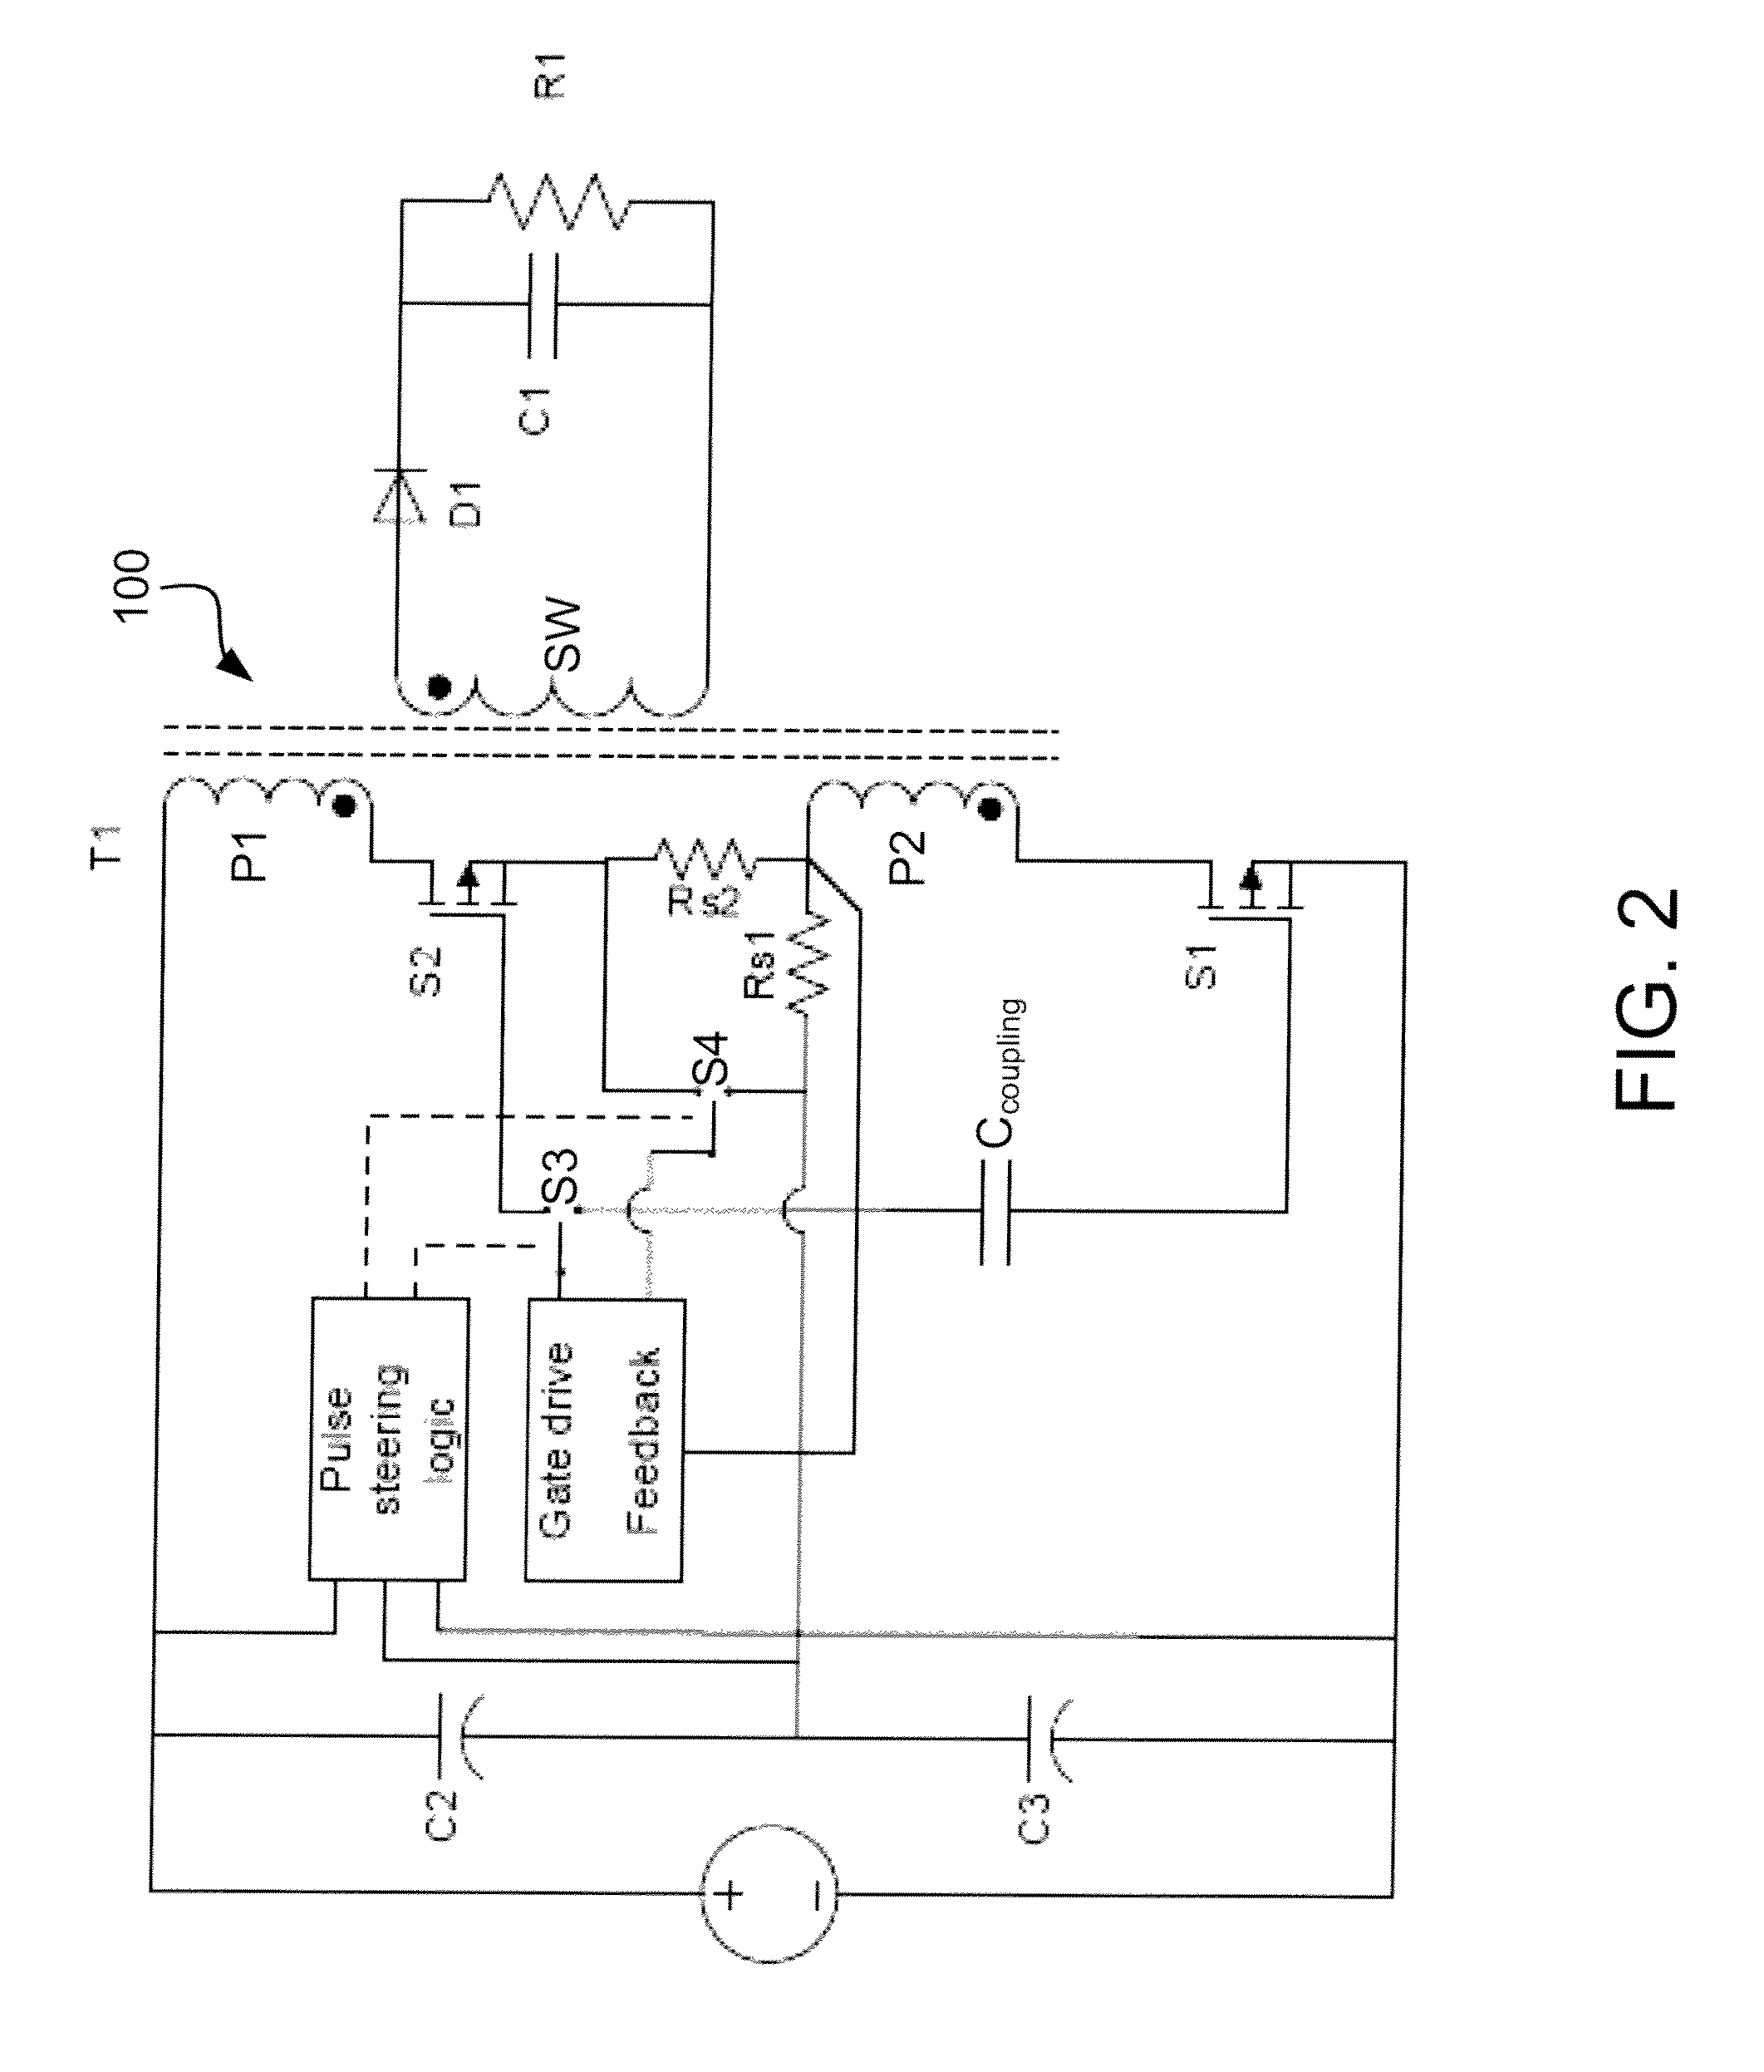 Stacked flyback converter with independent current loop control